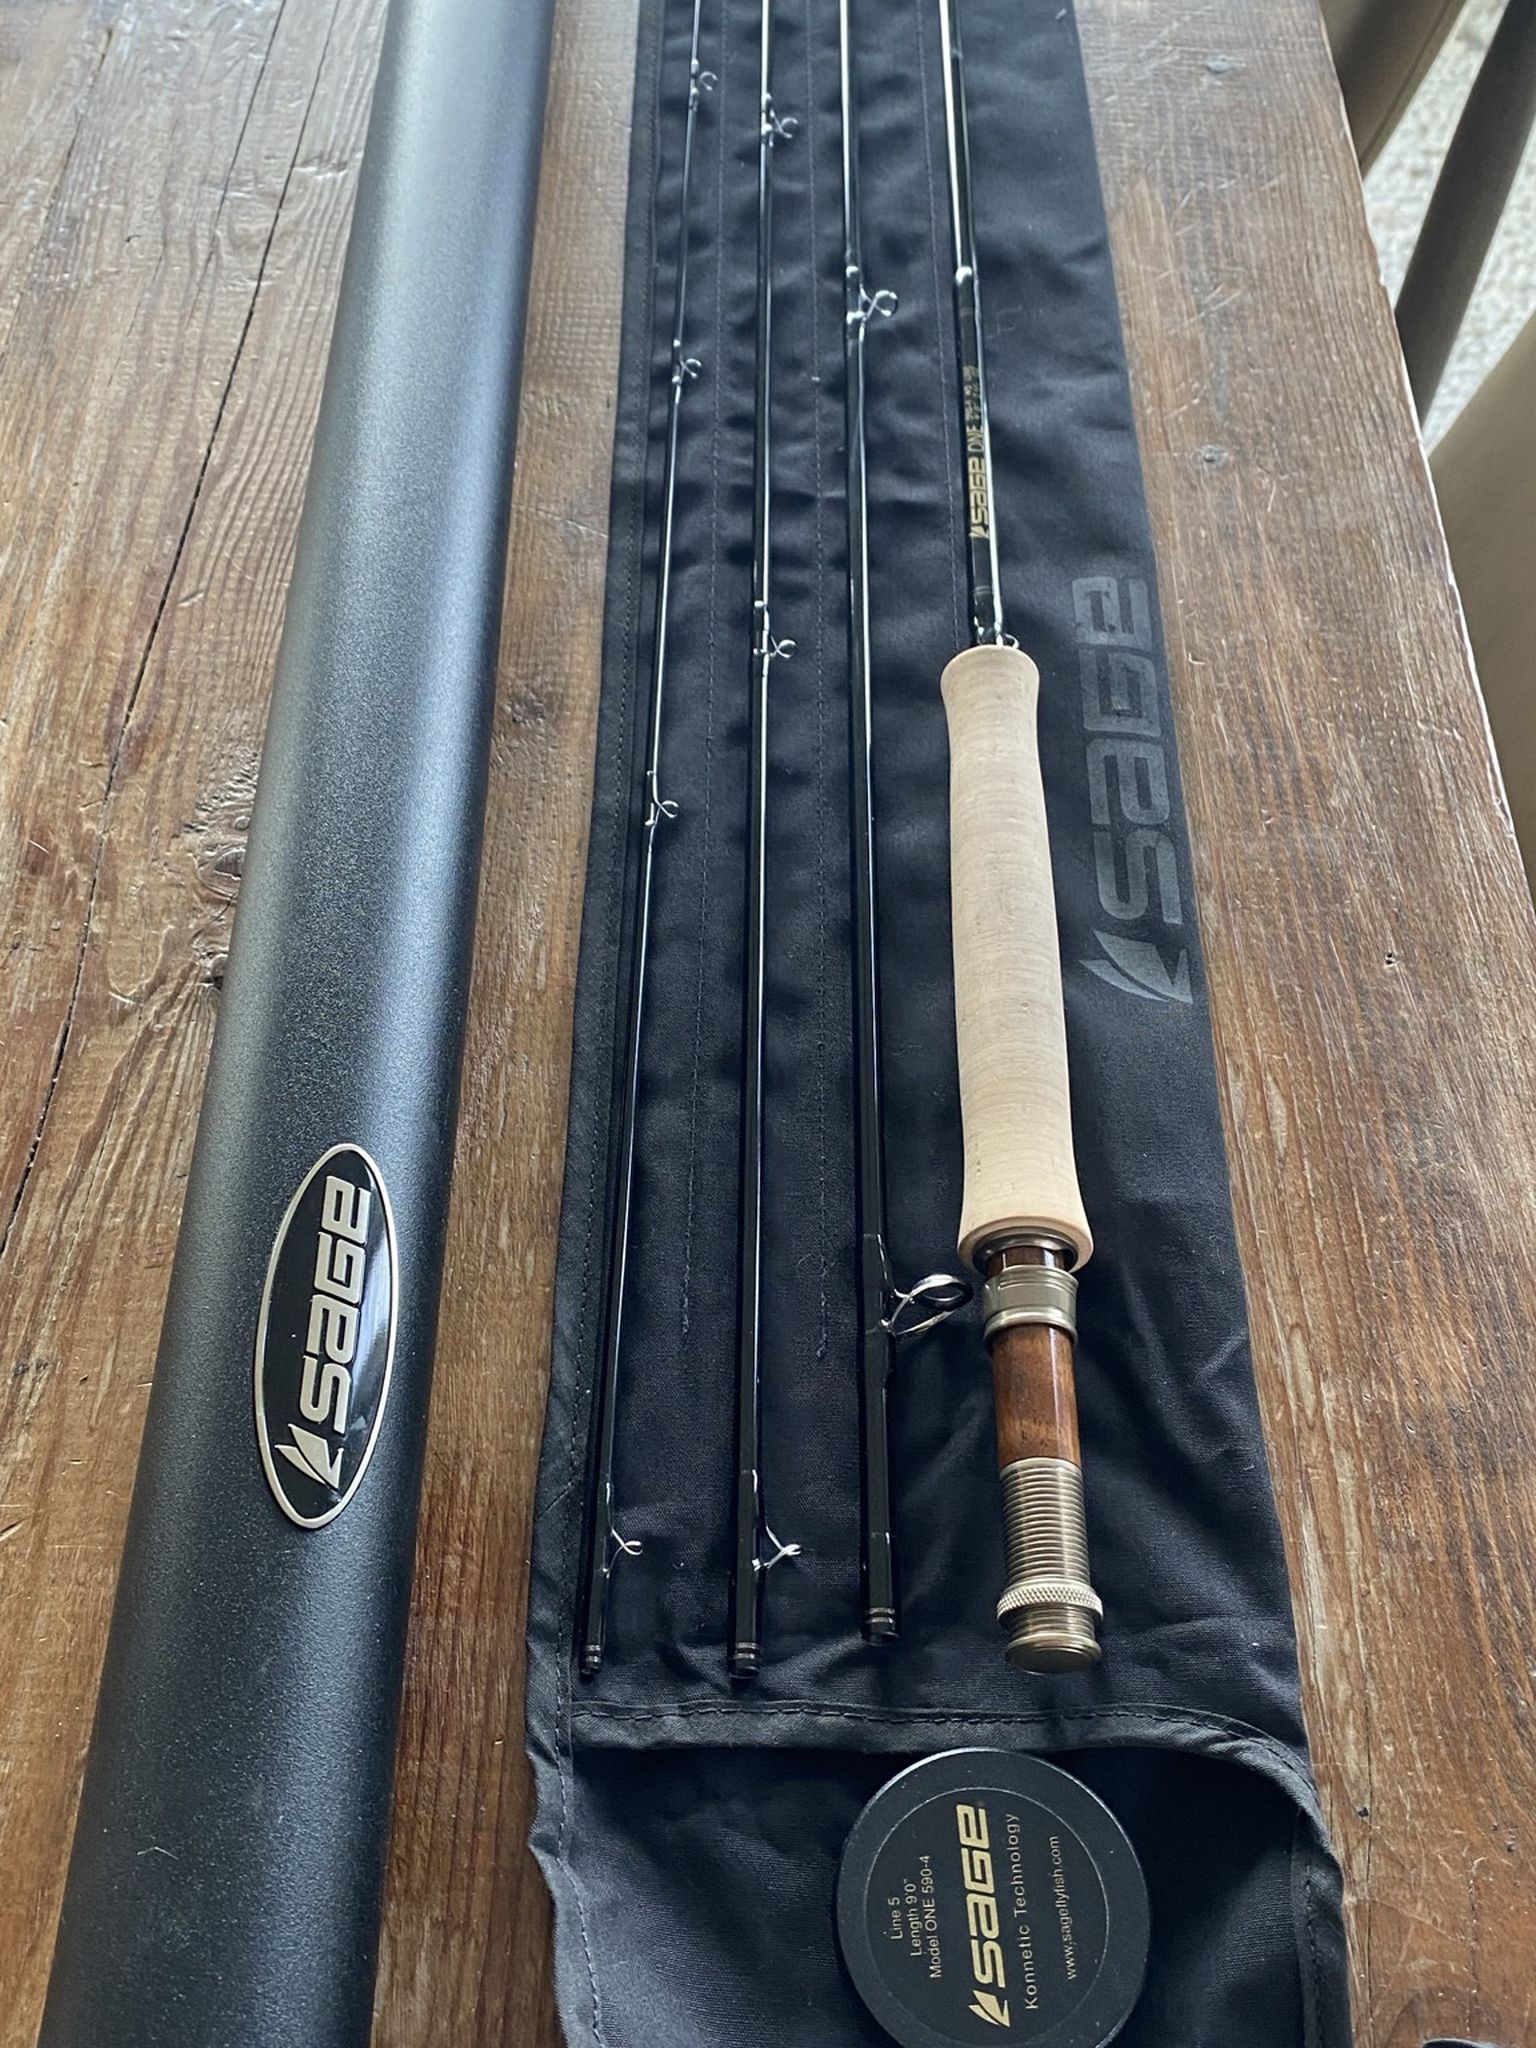 Sage One 590-4 Fly Fishing Rod